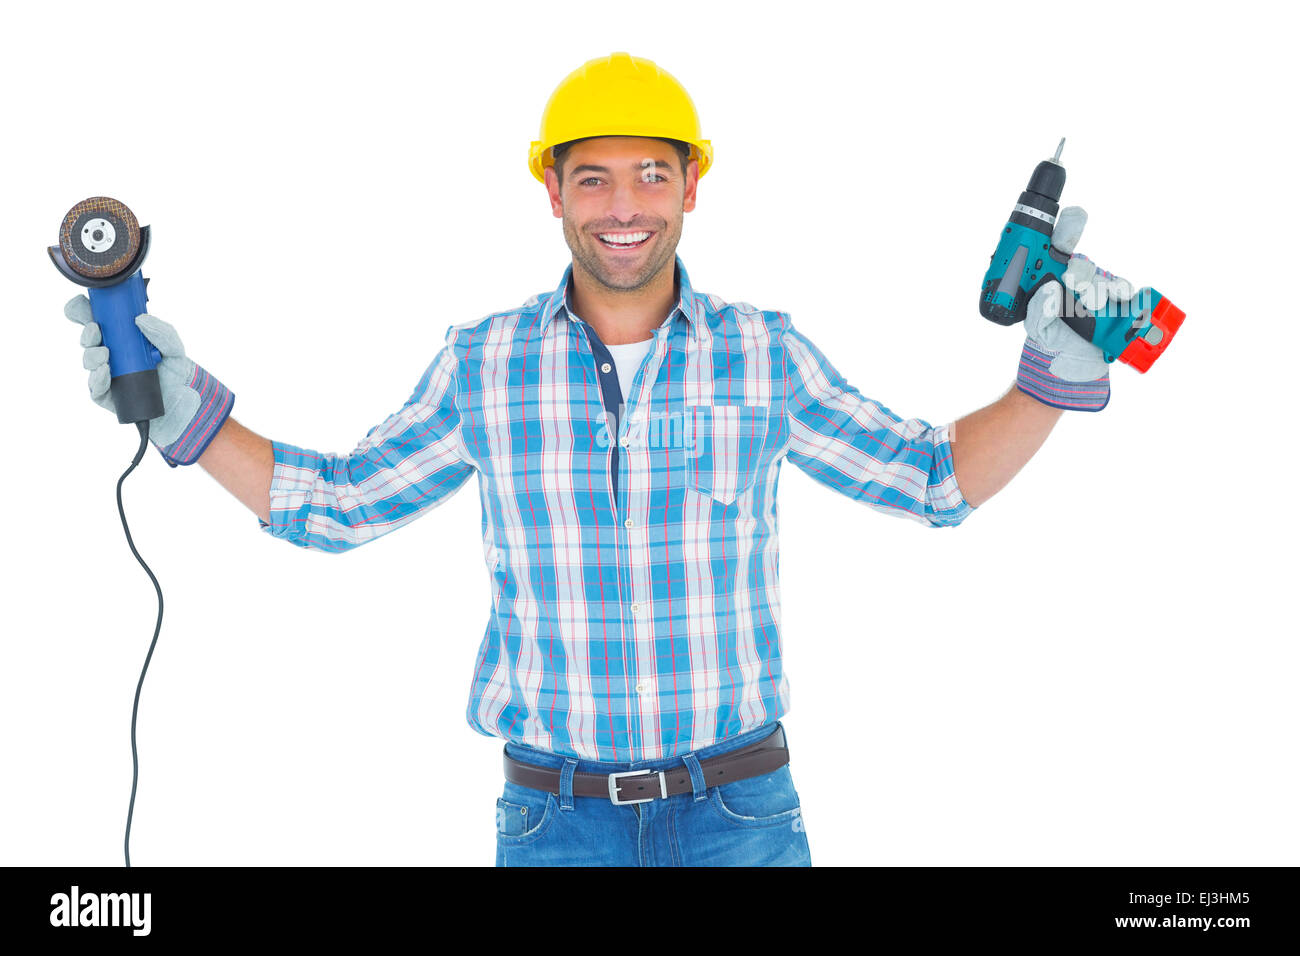 Manual worker holding power tools Stock Photo